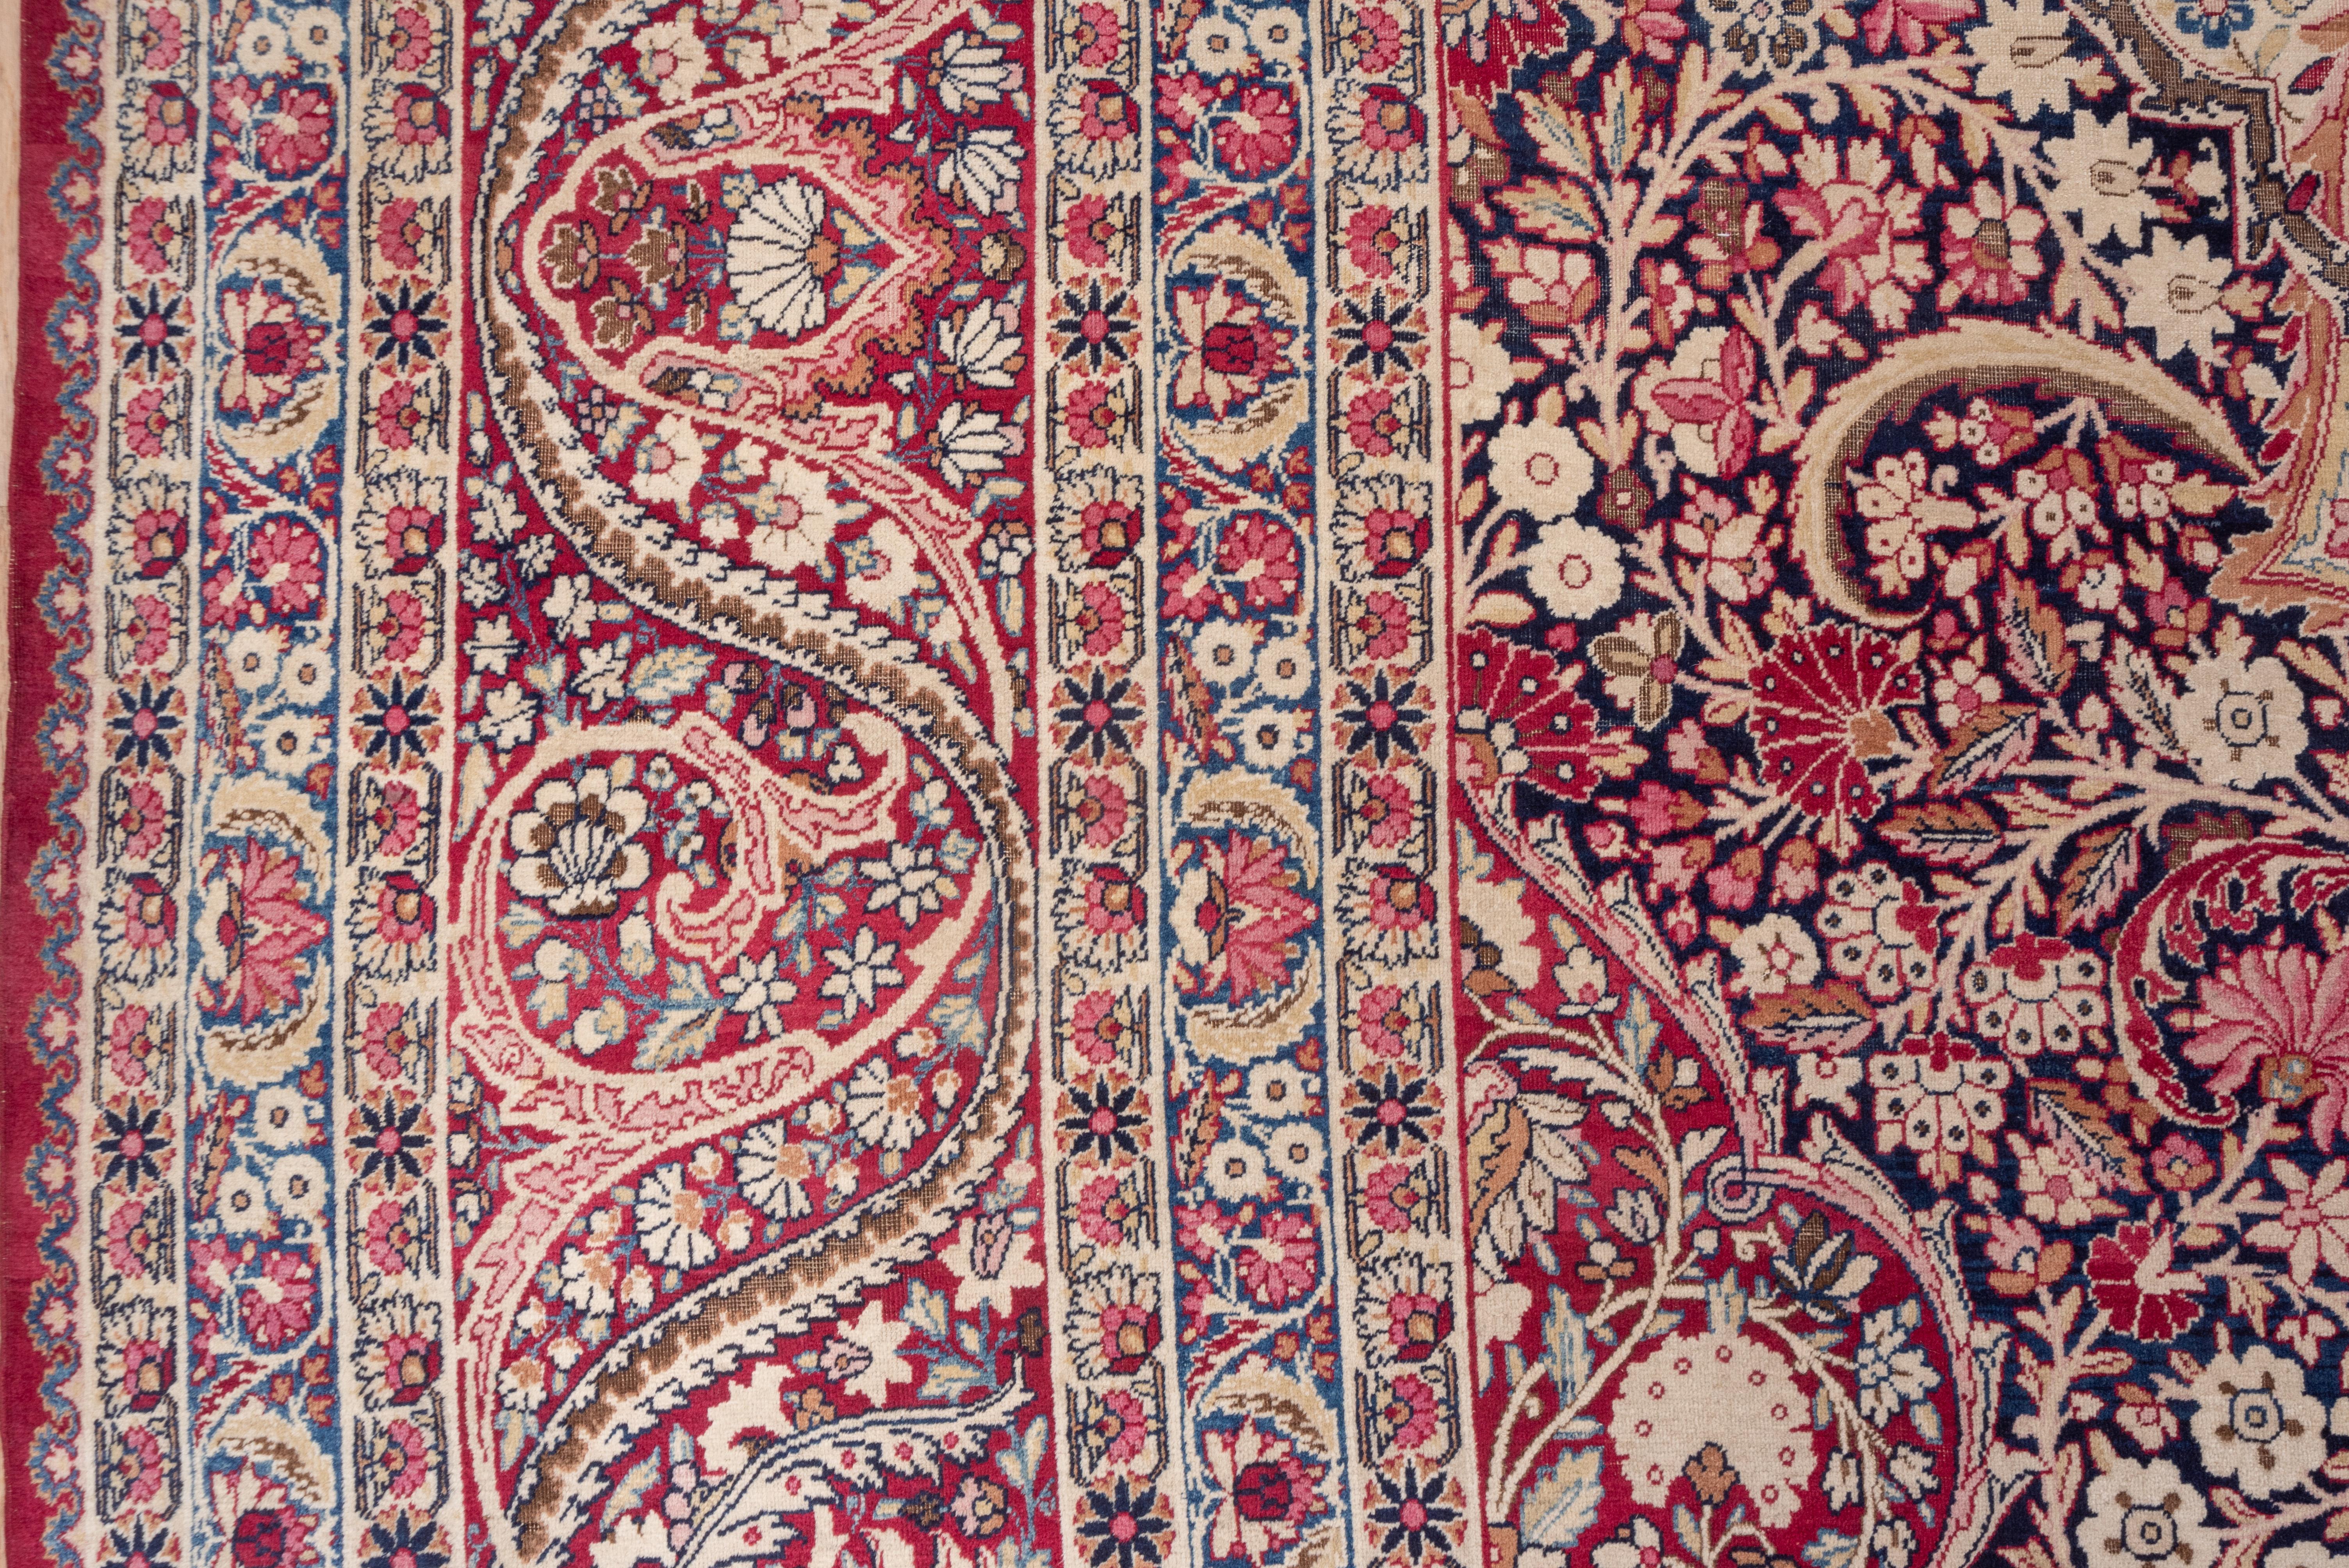 Lavar Kermans are of higher quality and this mansion carpet is an fine example with a navy field and wine red corners densely covered with a multi-layer vine and flower pattern supporting a 16-point palmette medallion. SE Persian Kerman city carpets